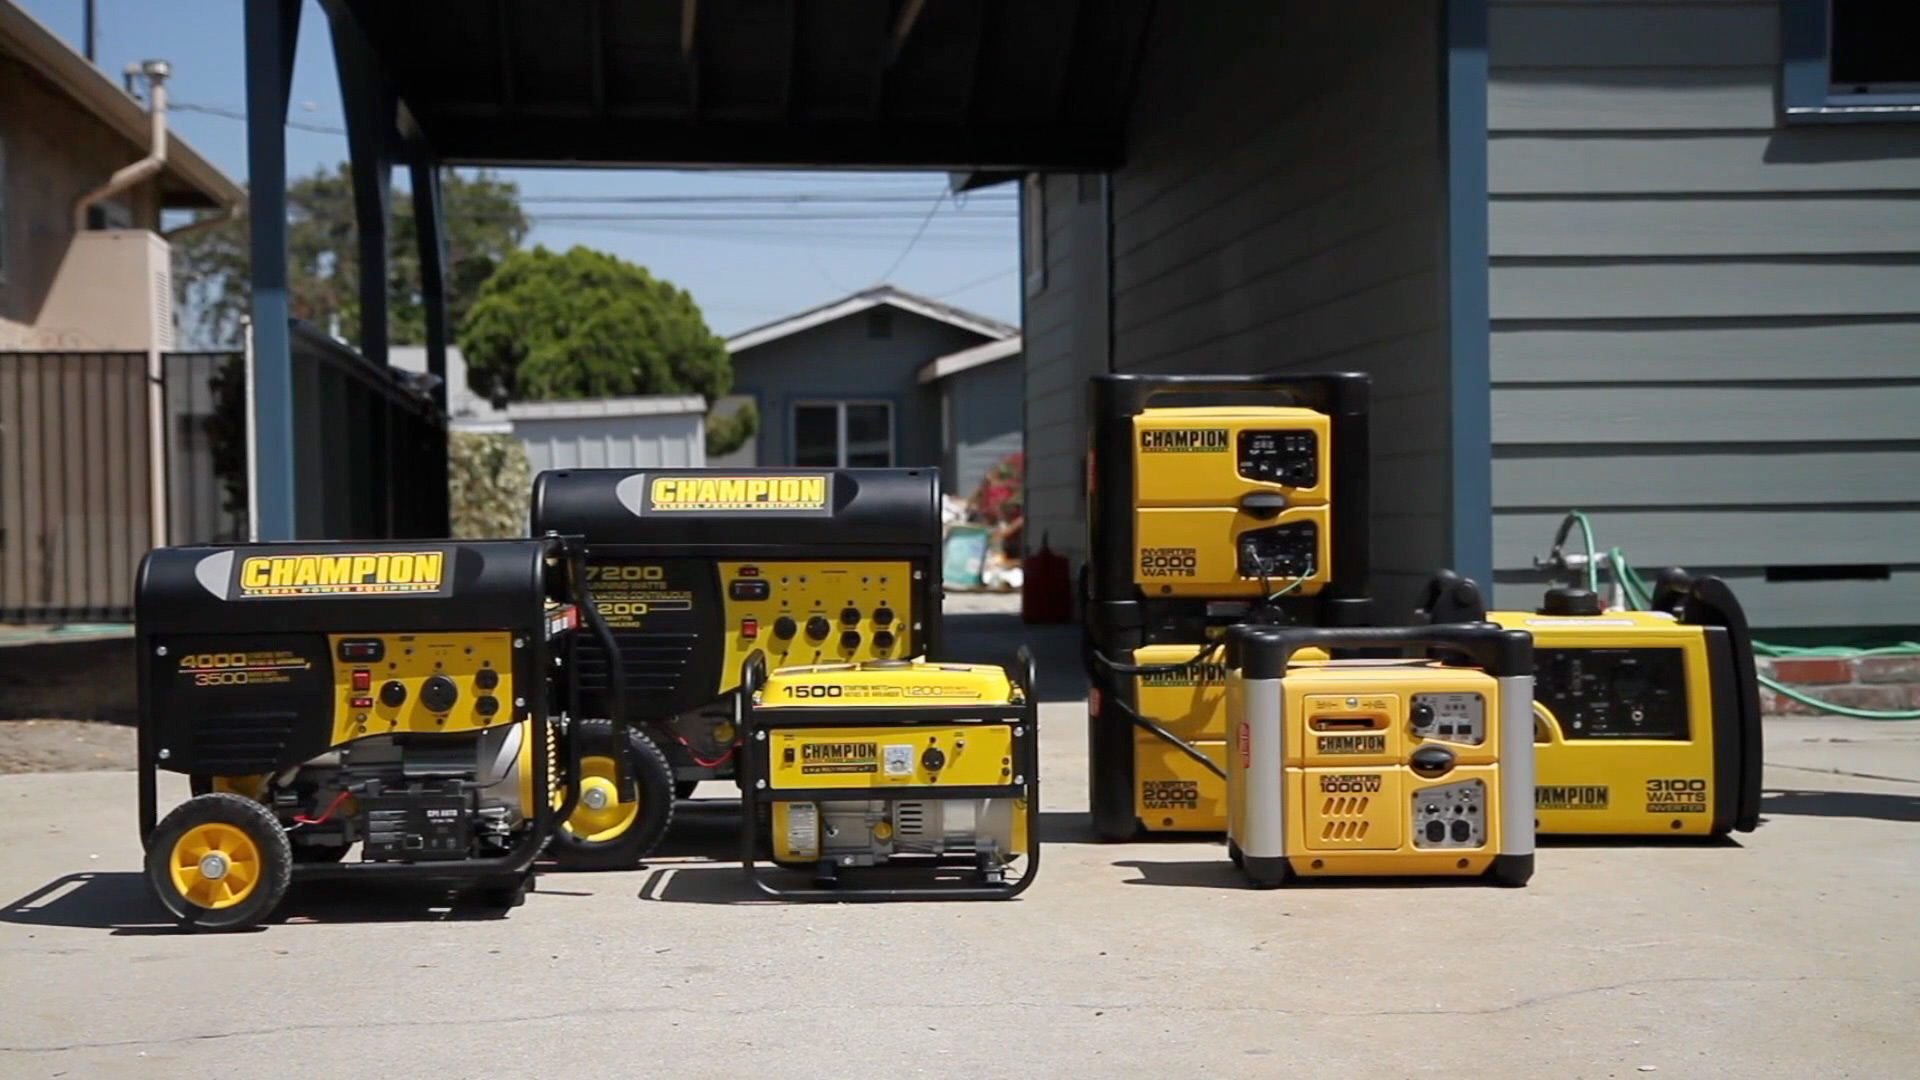 A video thumbnail showing a set of generators in the driveway of a house